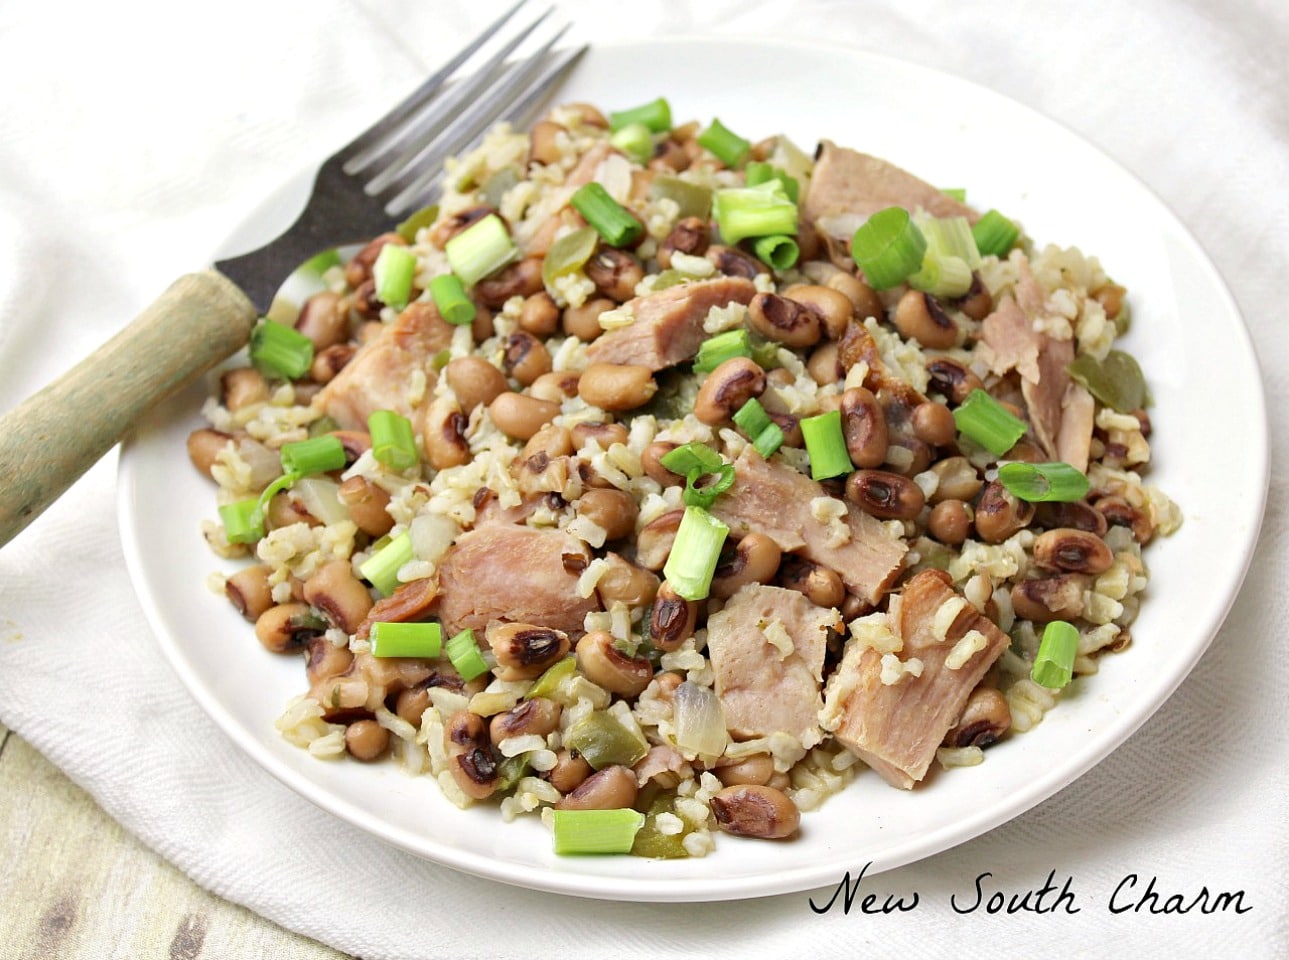 Hoppin' John and Rice is a traditional Southern dish with black eyed peas that is often served on New Year's Day. 